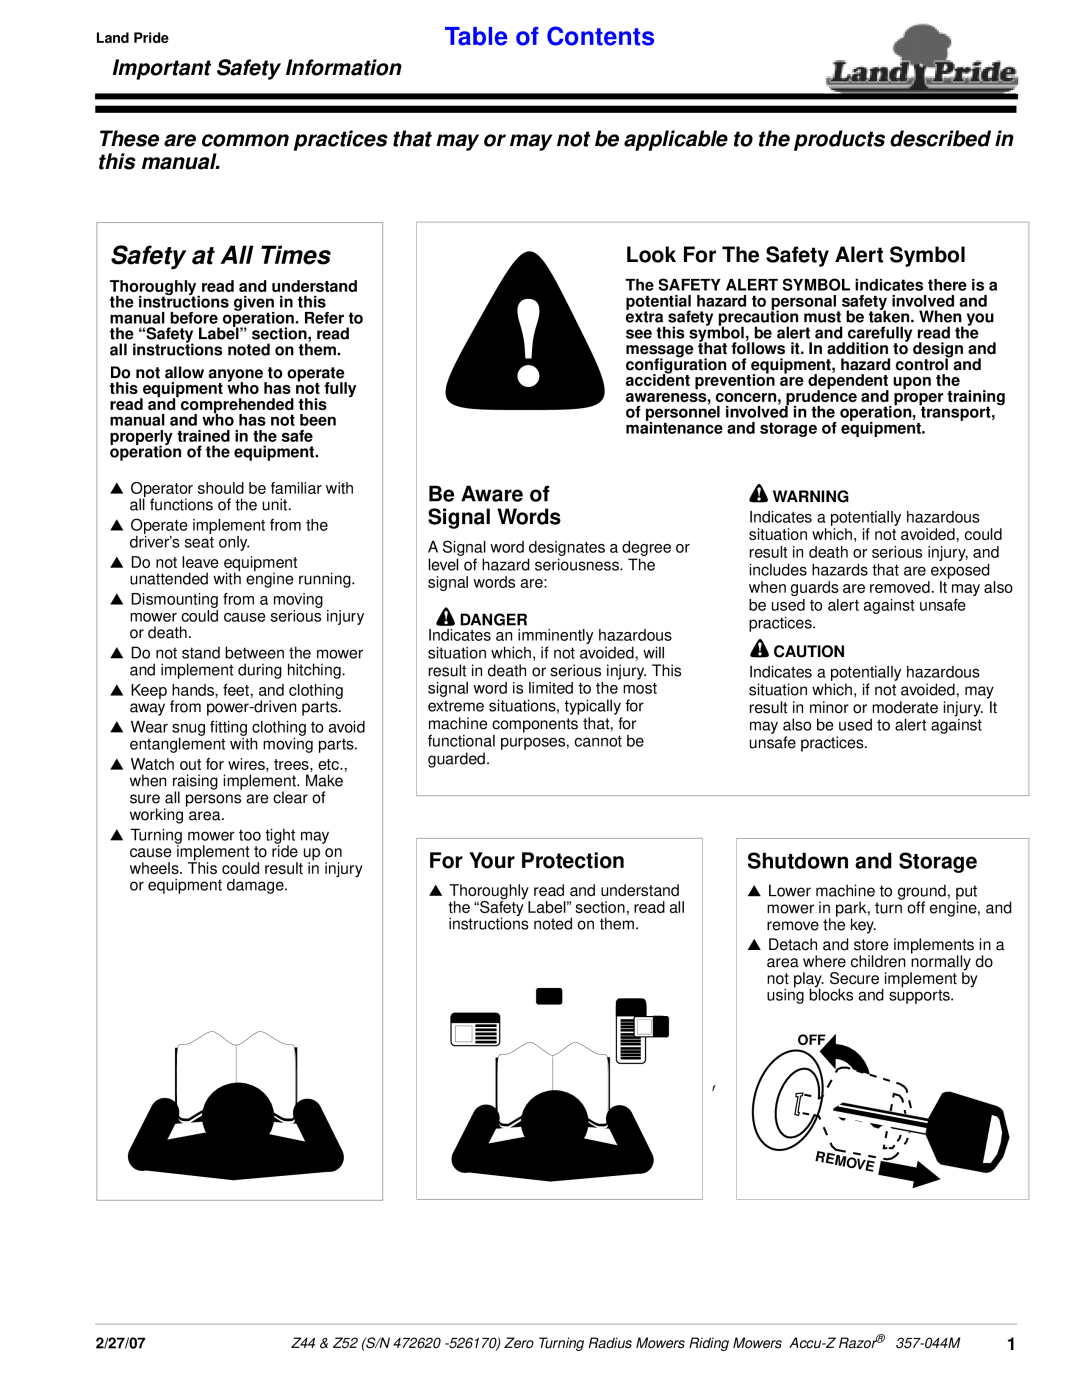 Land Pride 357-044M Safety at All Times, Table of Contents, Important Safety Information, Look For The Safety Alert Symbol 